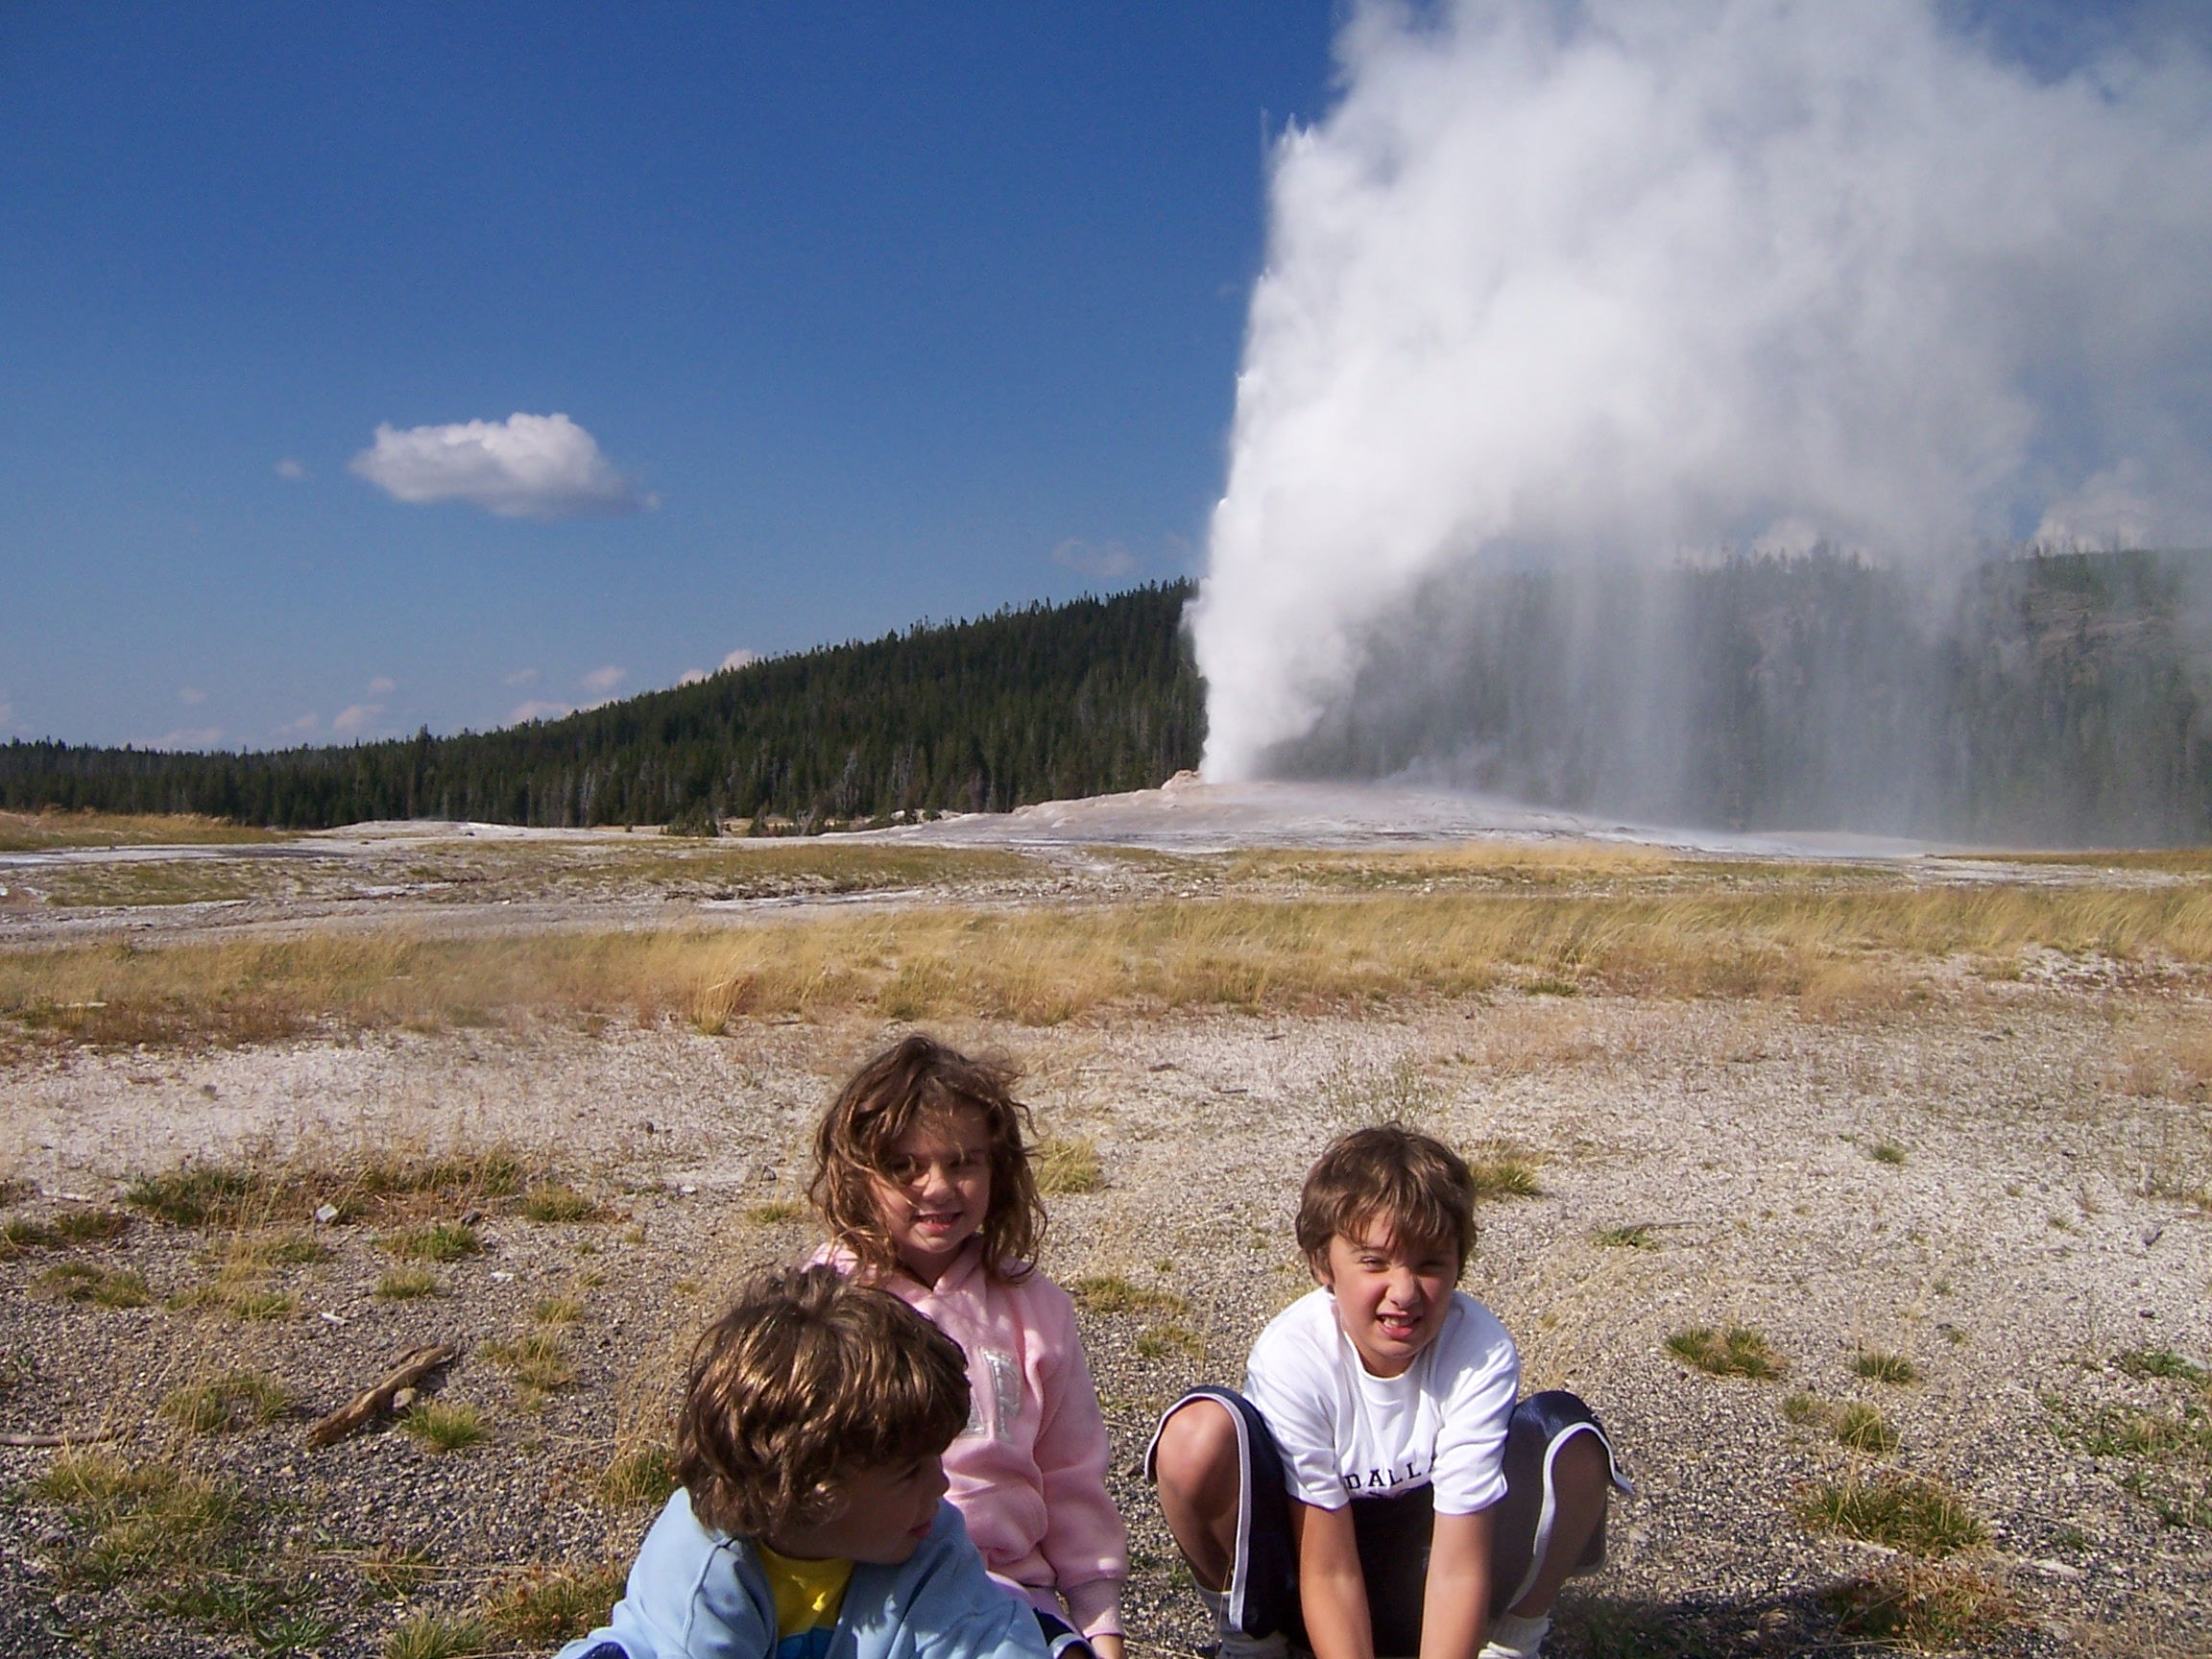 The kids and Old Faithful